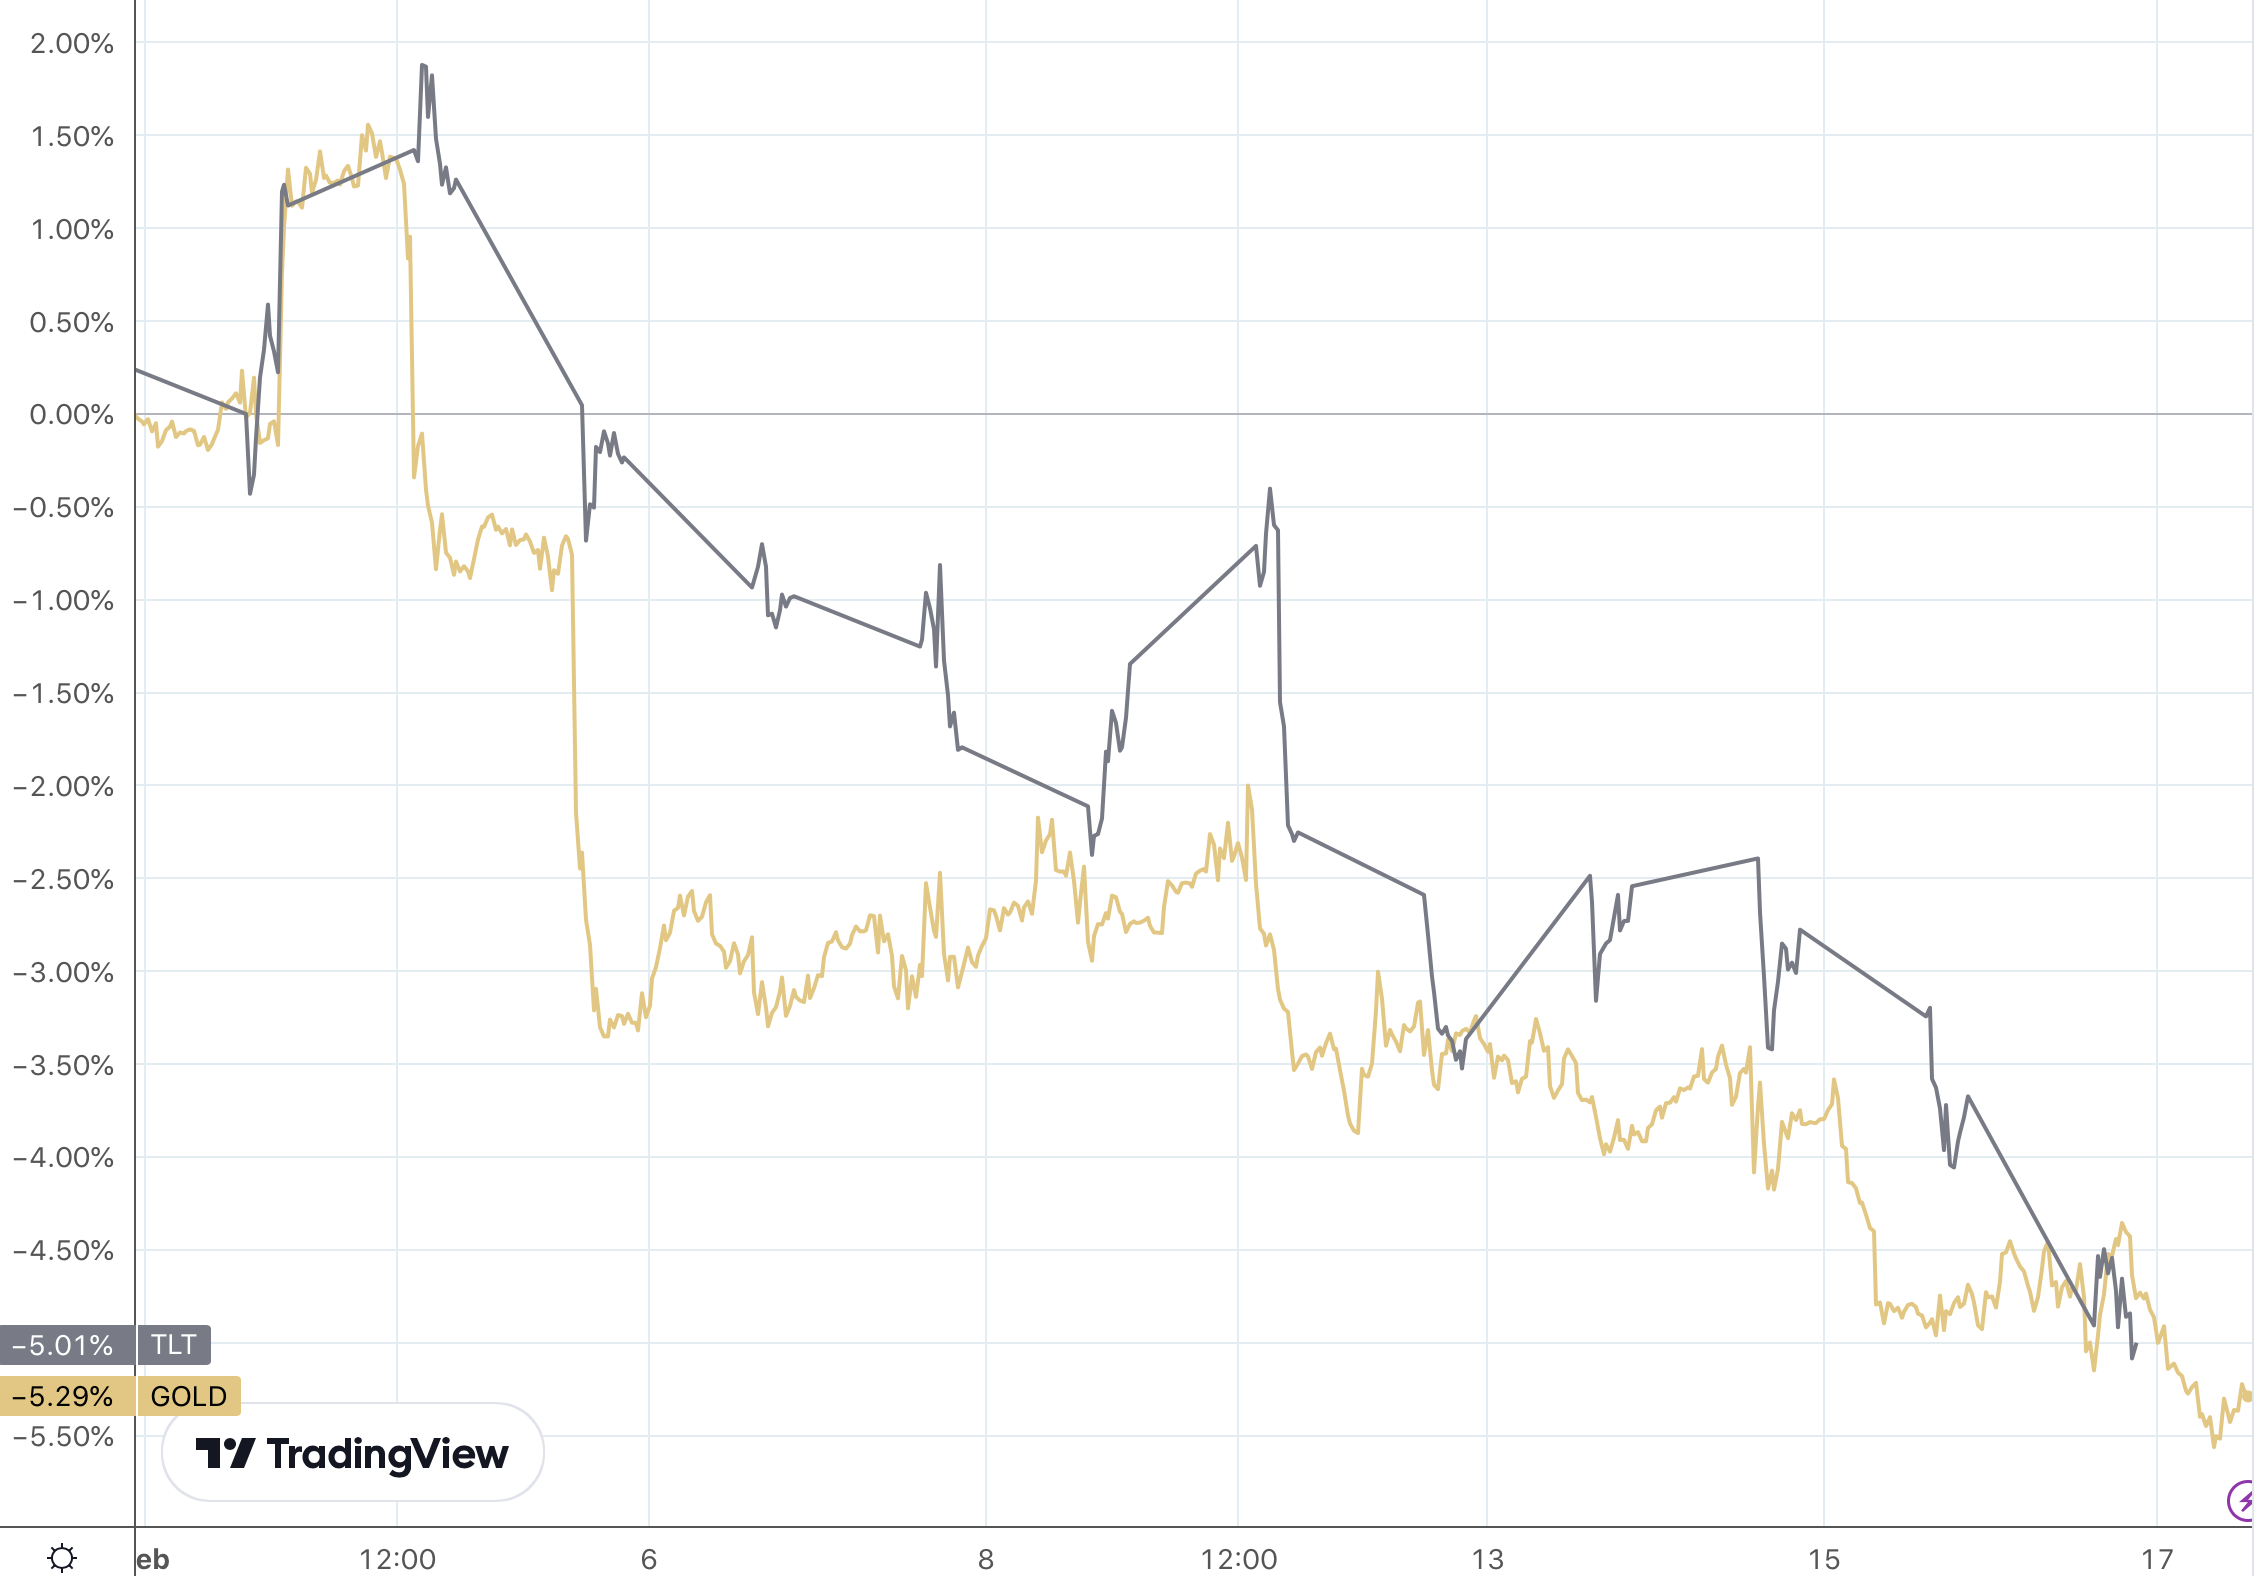 overlay line chart showing the sell off in gold and US Treasuries